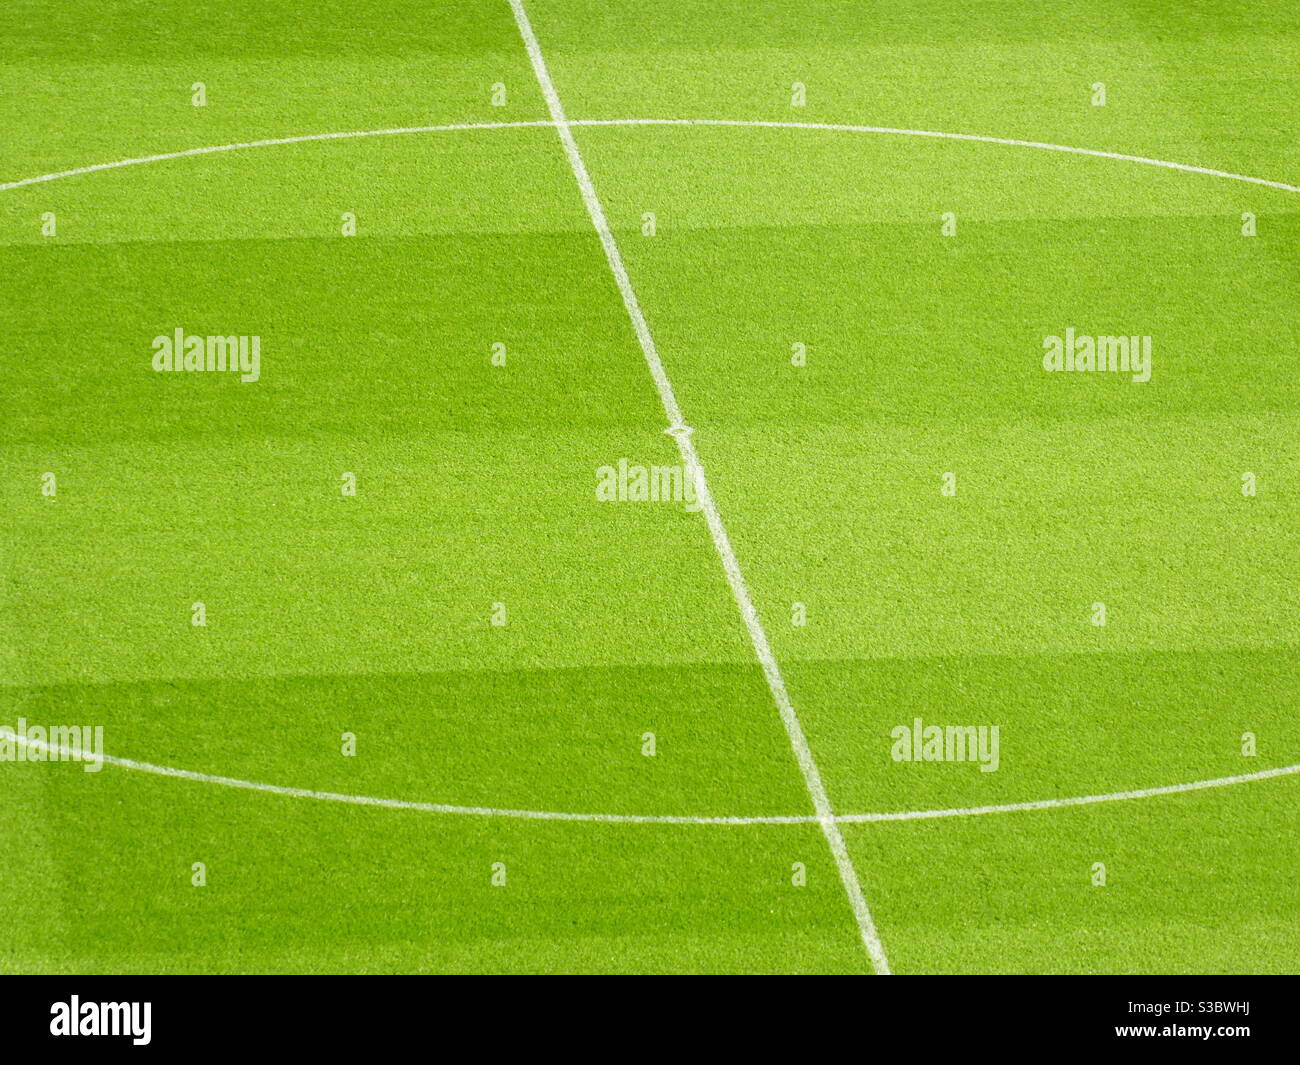 A grass close up of the centre line in the middle of a football pitch Stock Photo